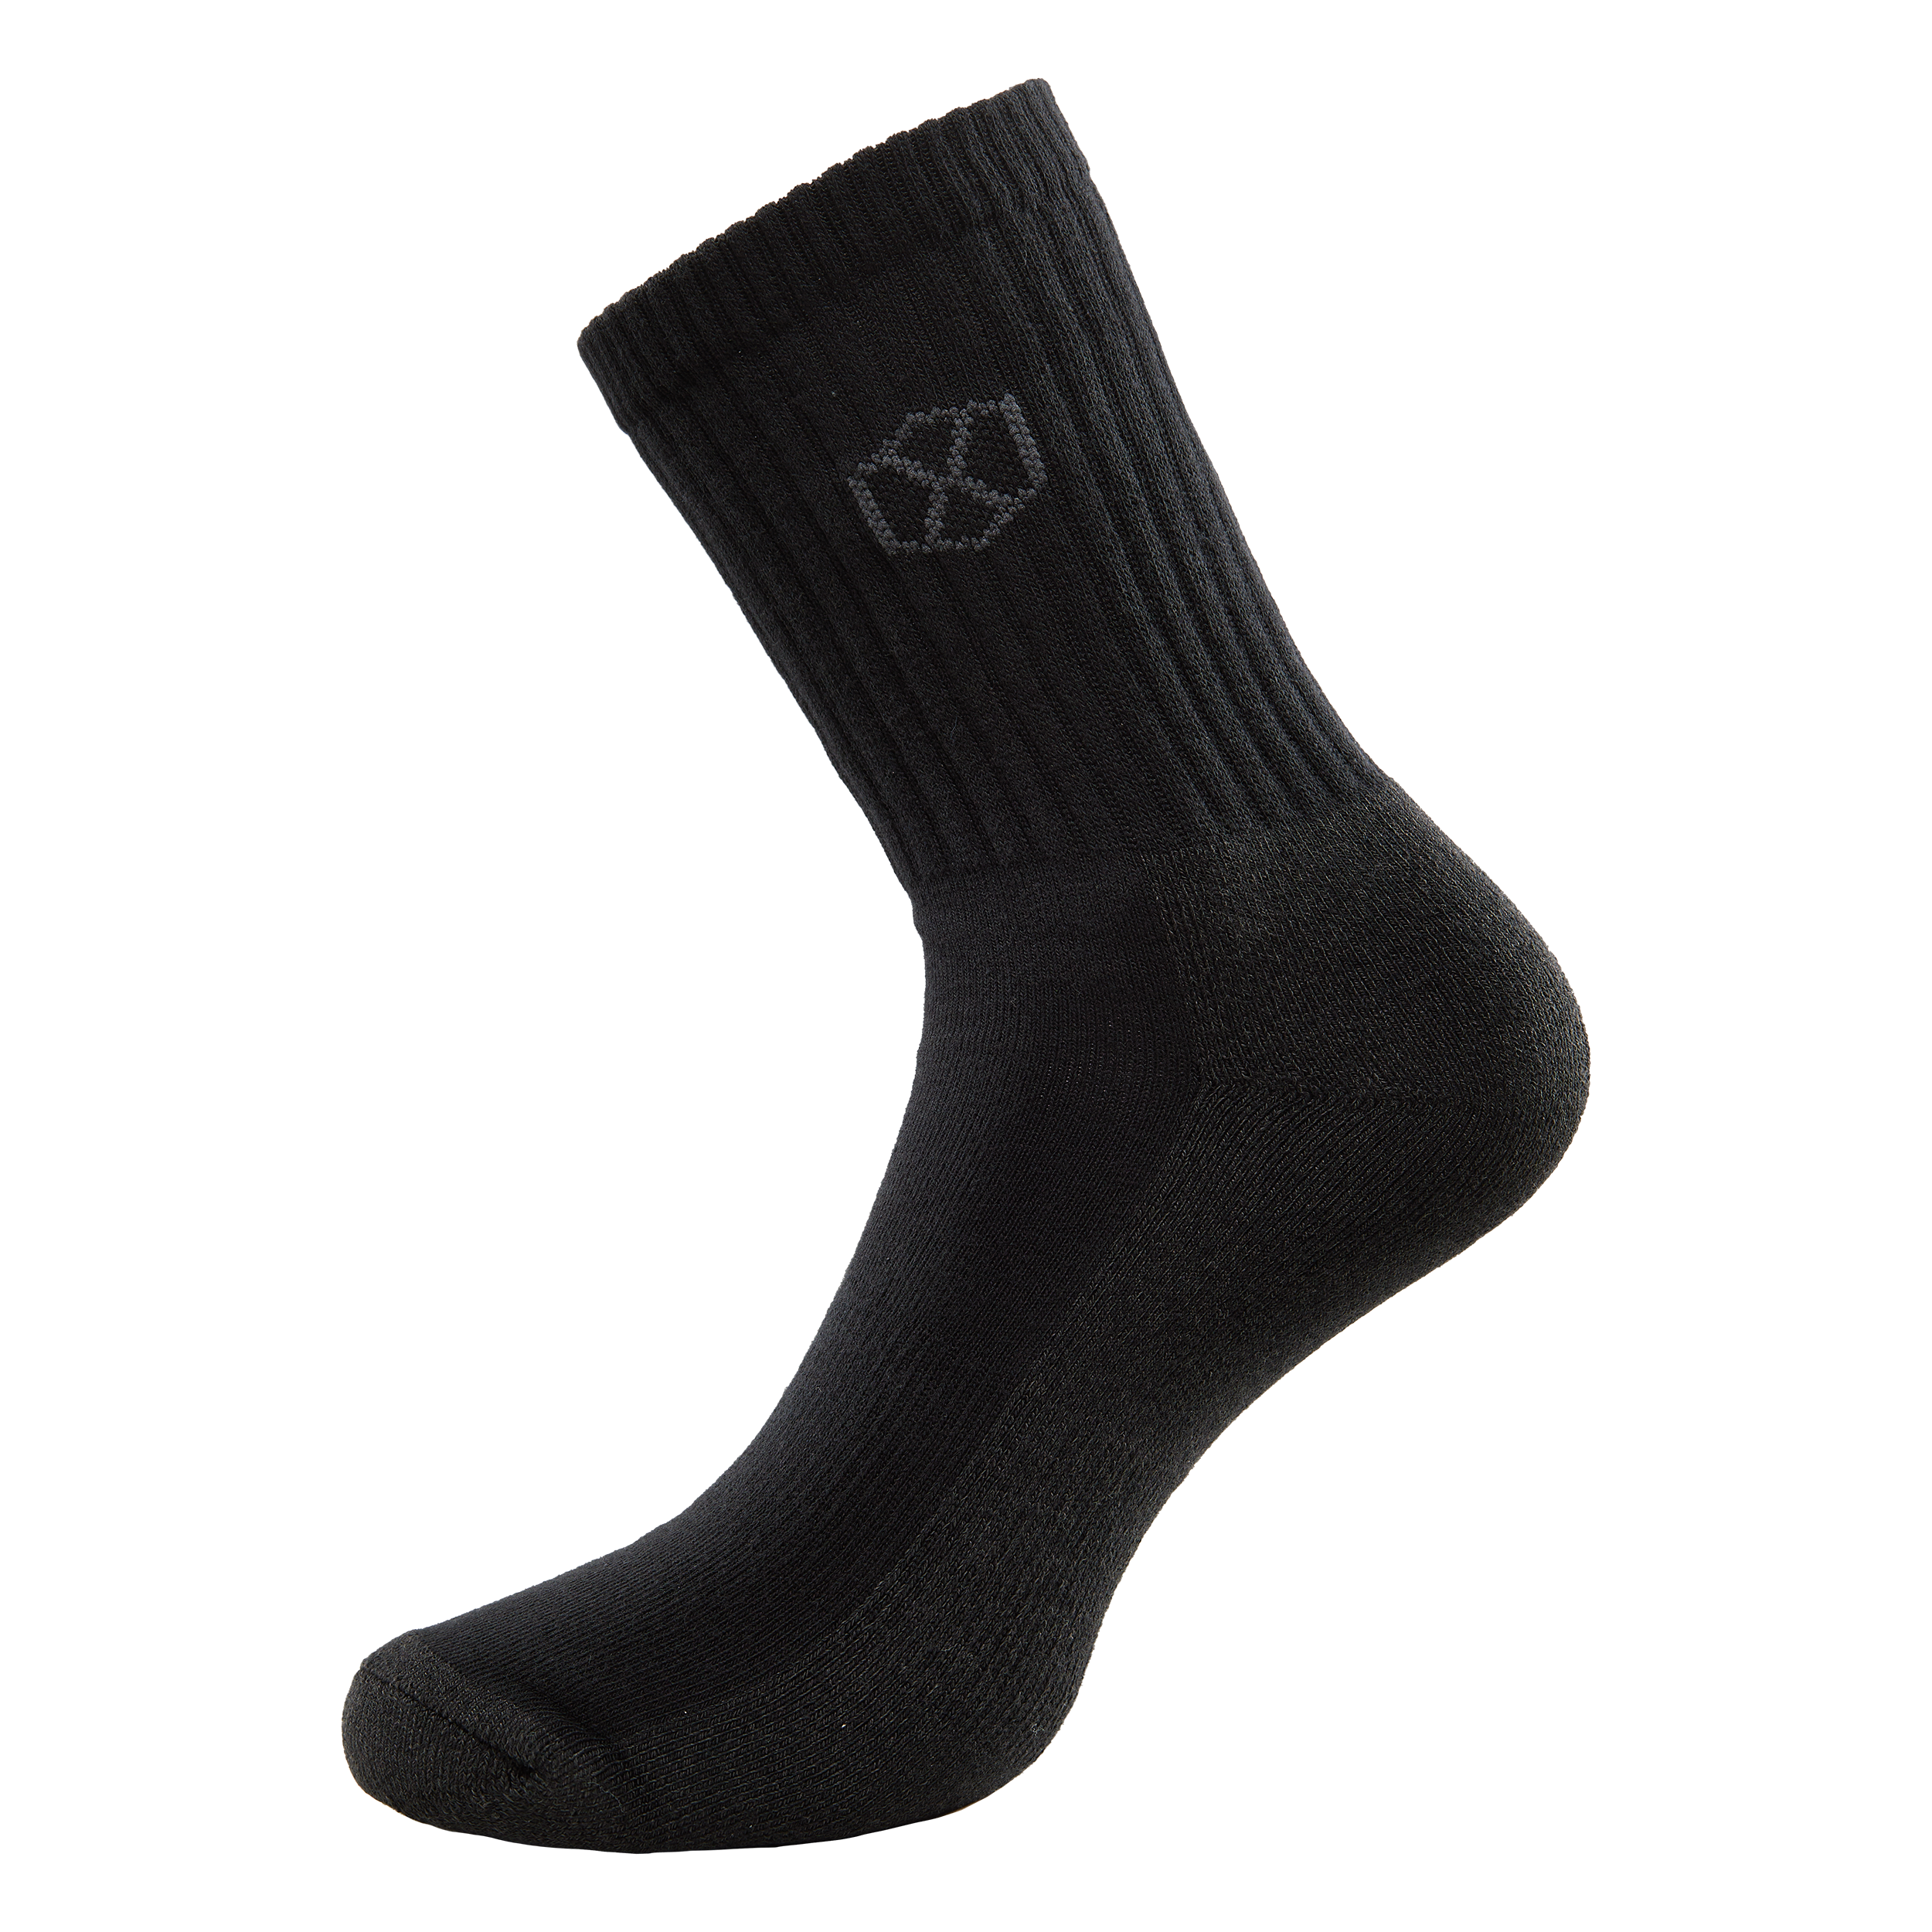 All Rounder Socks / Everyday Performance Series (crew) & Activewear Series (low cut)